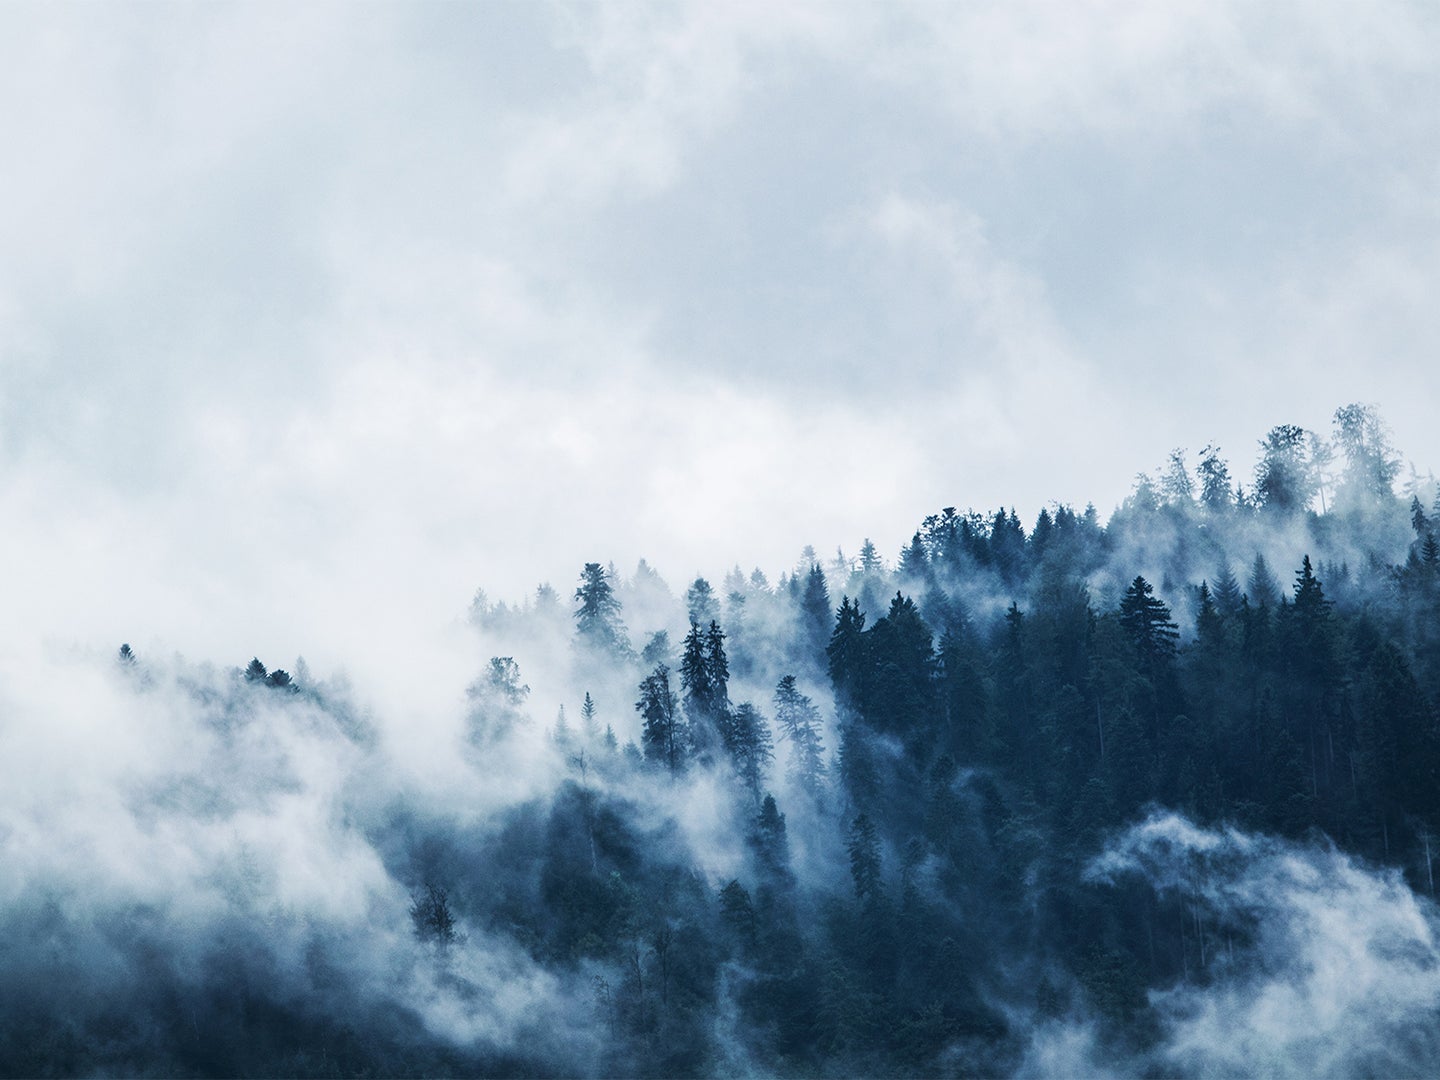 Fog billowing off a misty mountain forest.